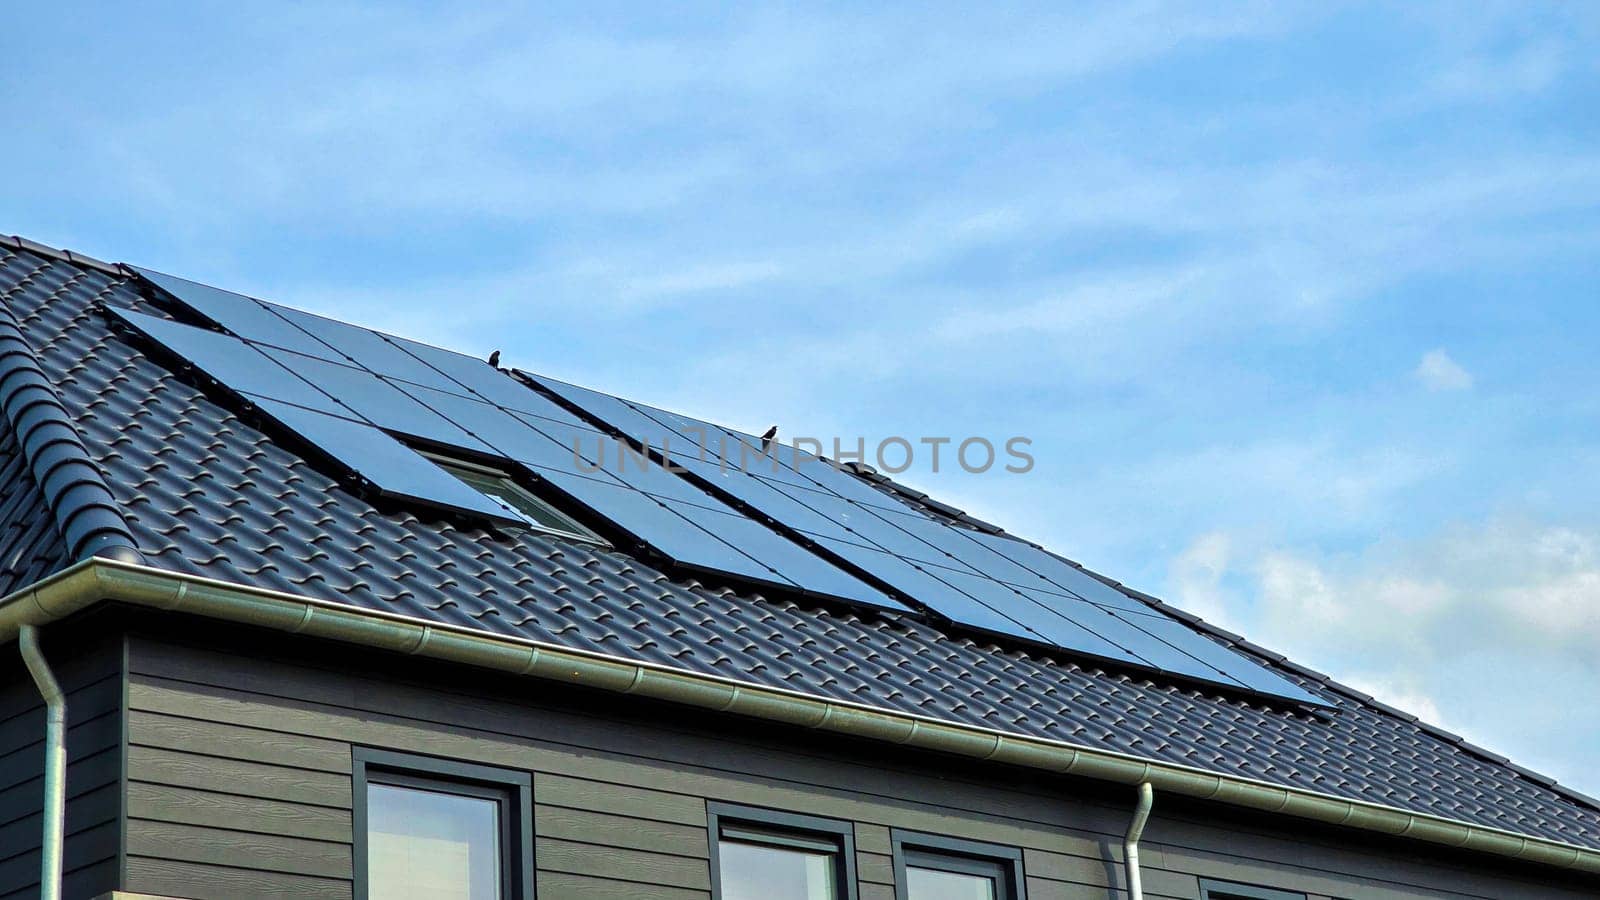 Newly built houses with black solar panels on the roof, Close up of new family home with black solar panels. Zonnepanelen, Zonne energie, Translation: Solar panel, Sun Energy